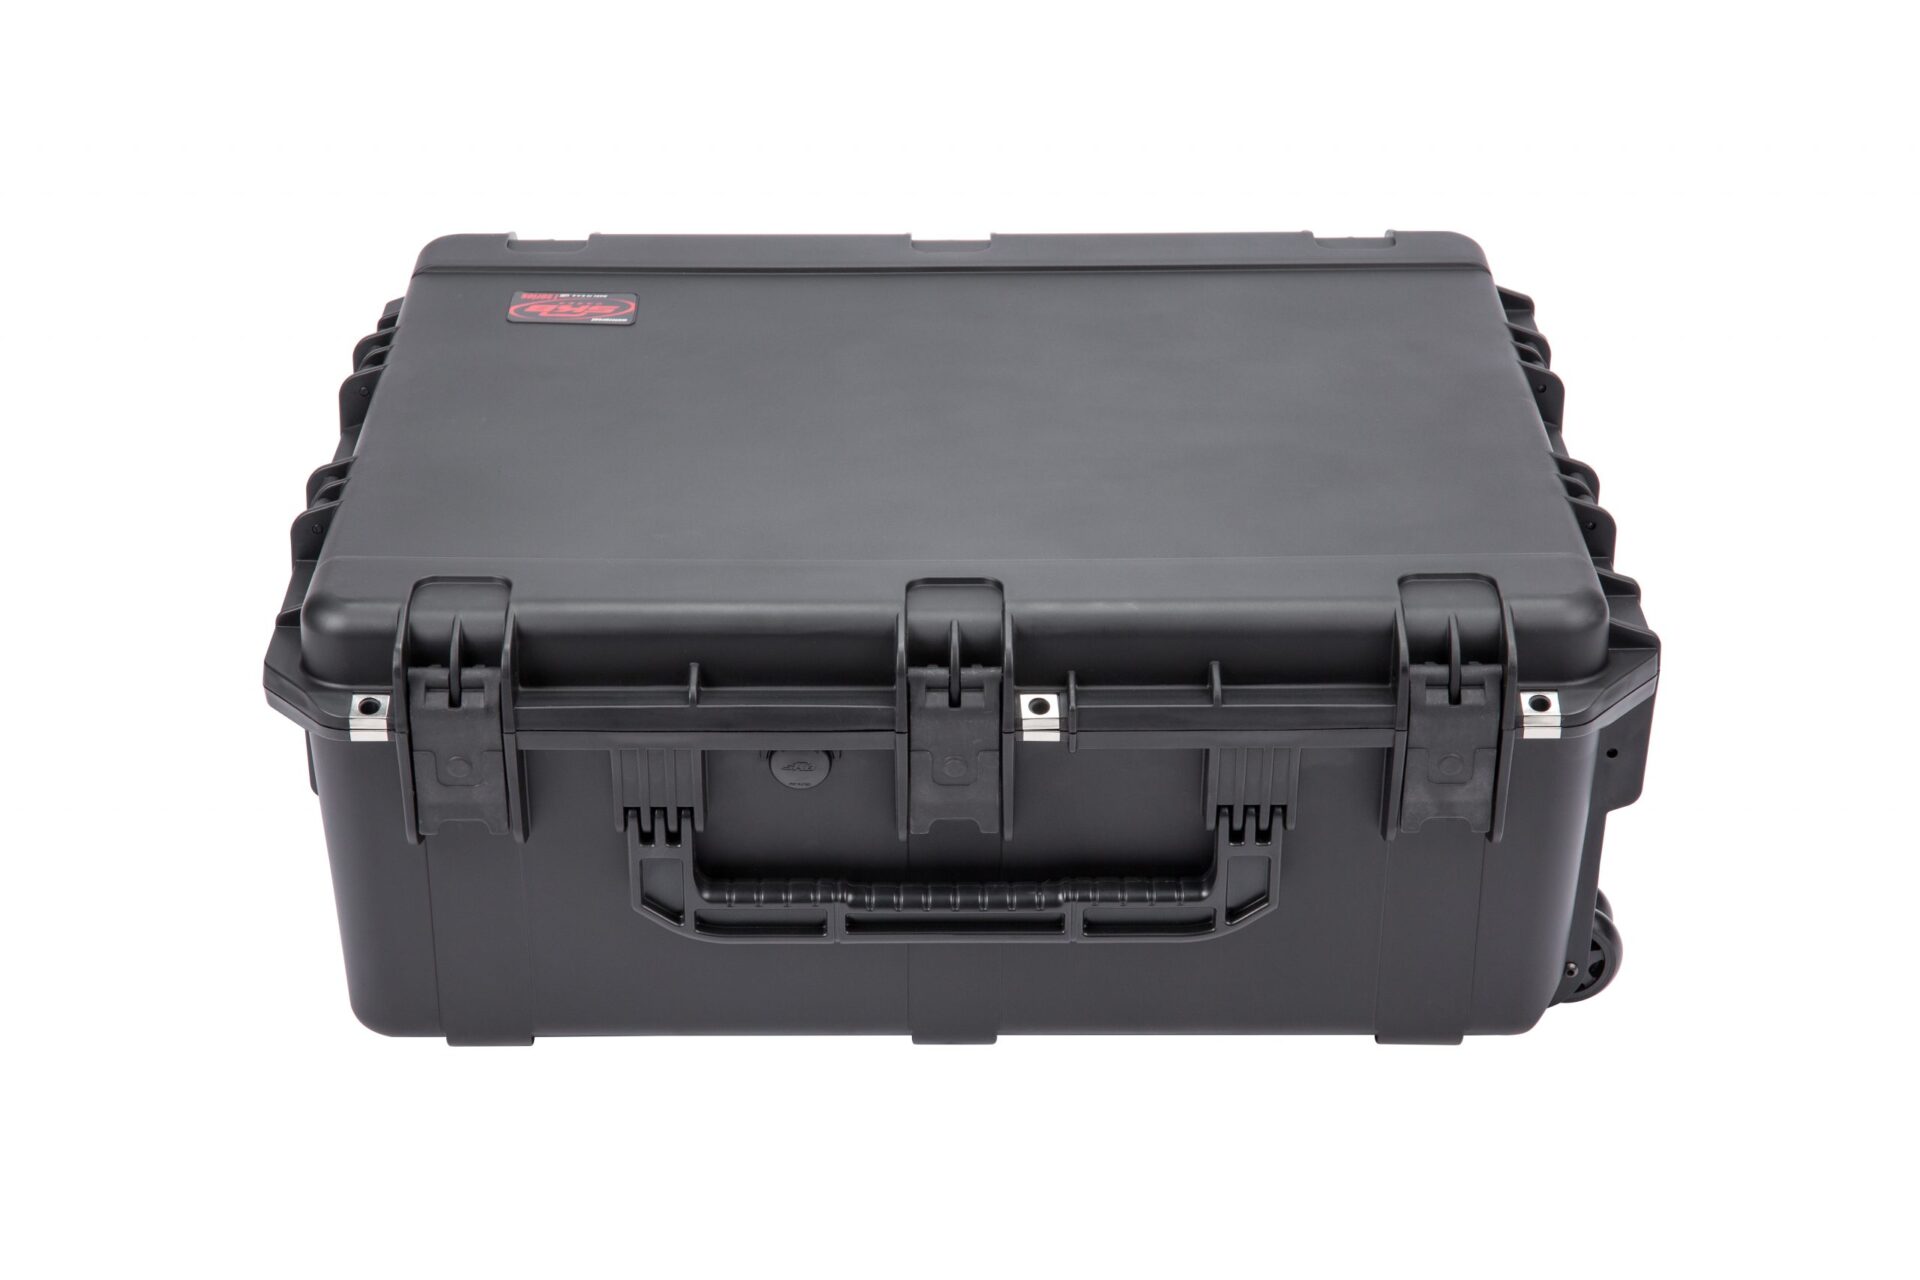 A black case with wheels and handles.